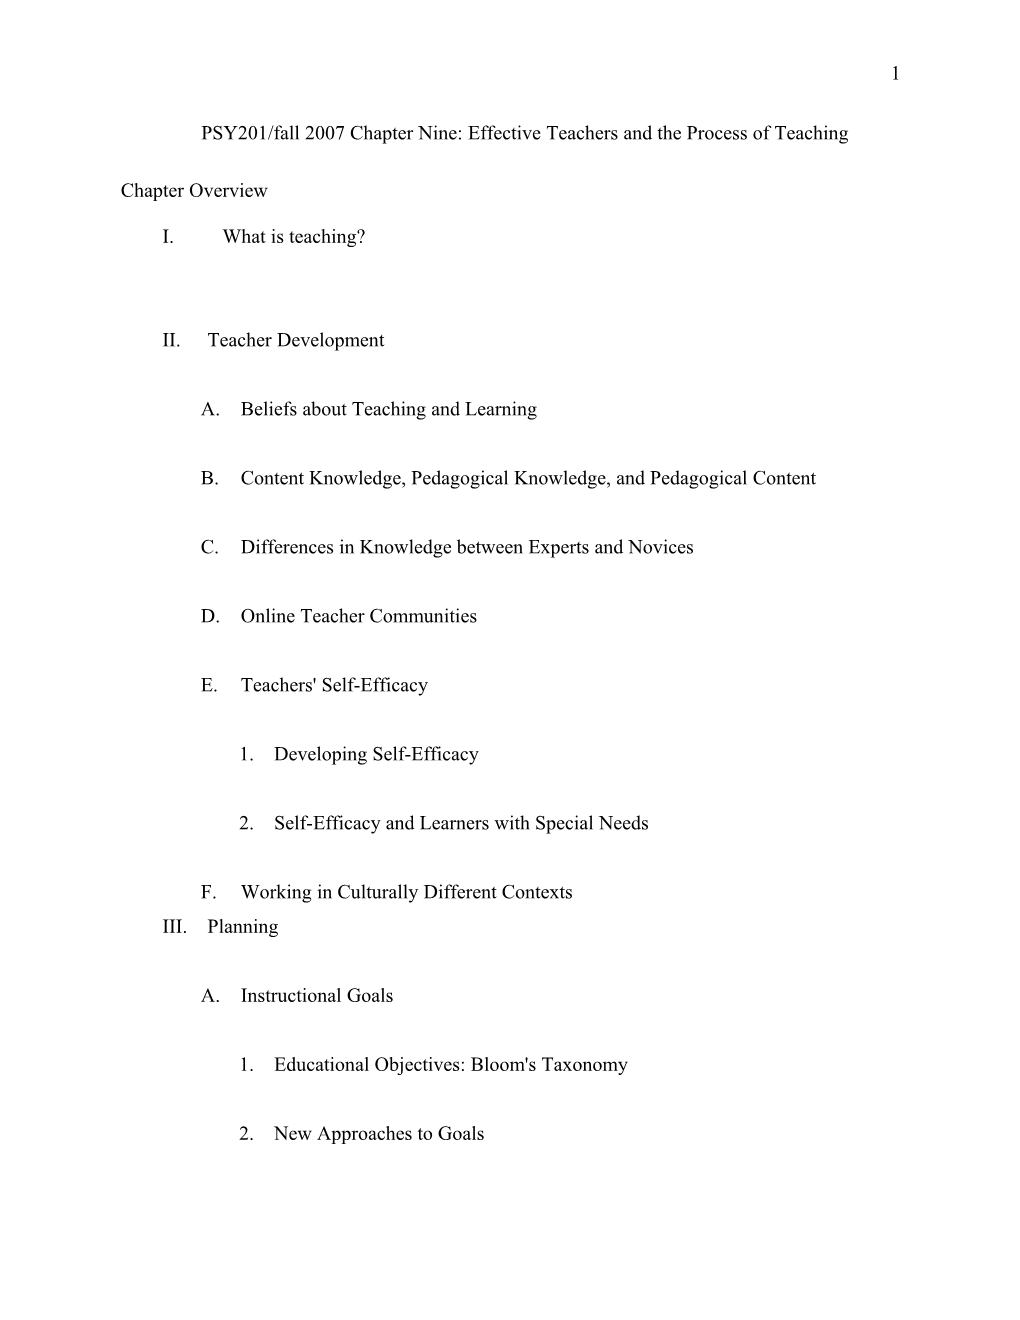 Chapter Nine: Effective Teachers and the Process of Teaching